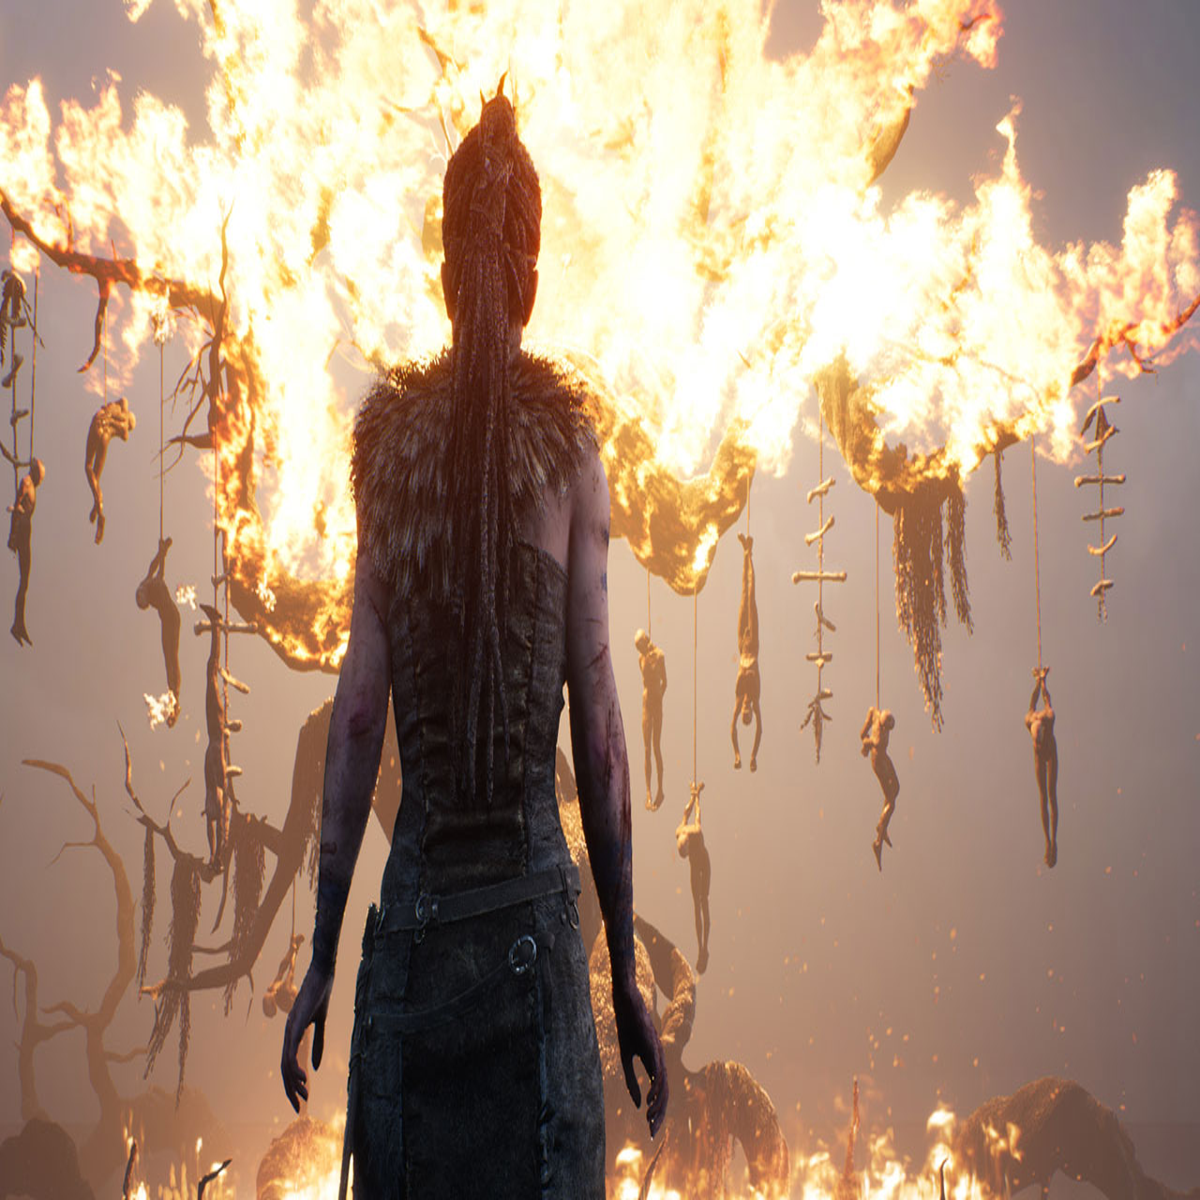 Is Hellblade 2 Coming to PS4 and PS5? - Cultured Vultures